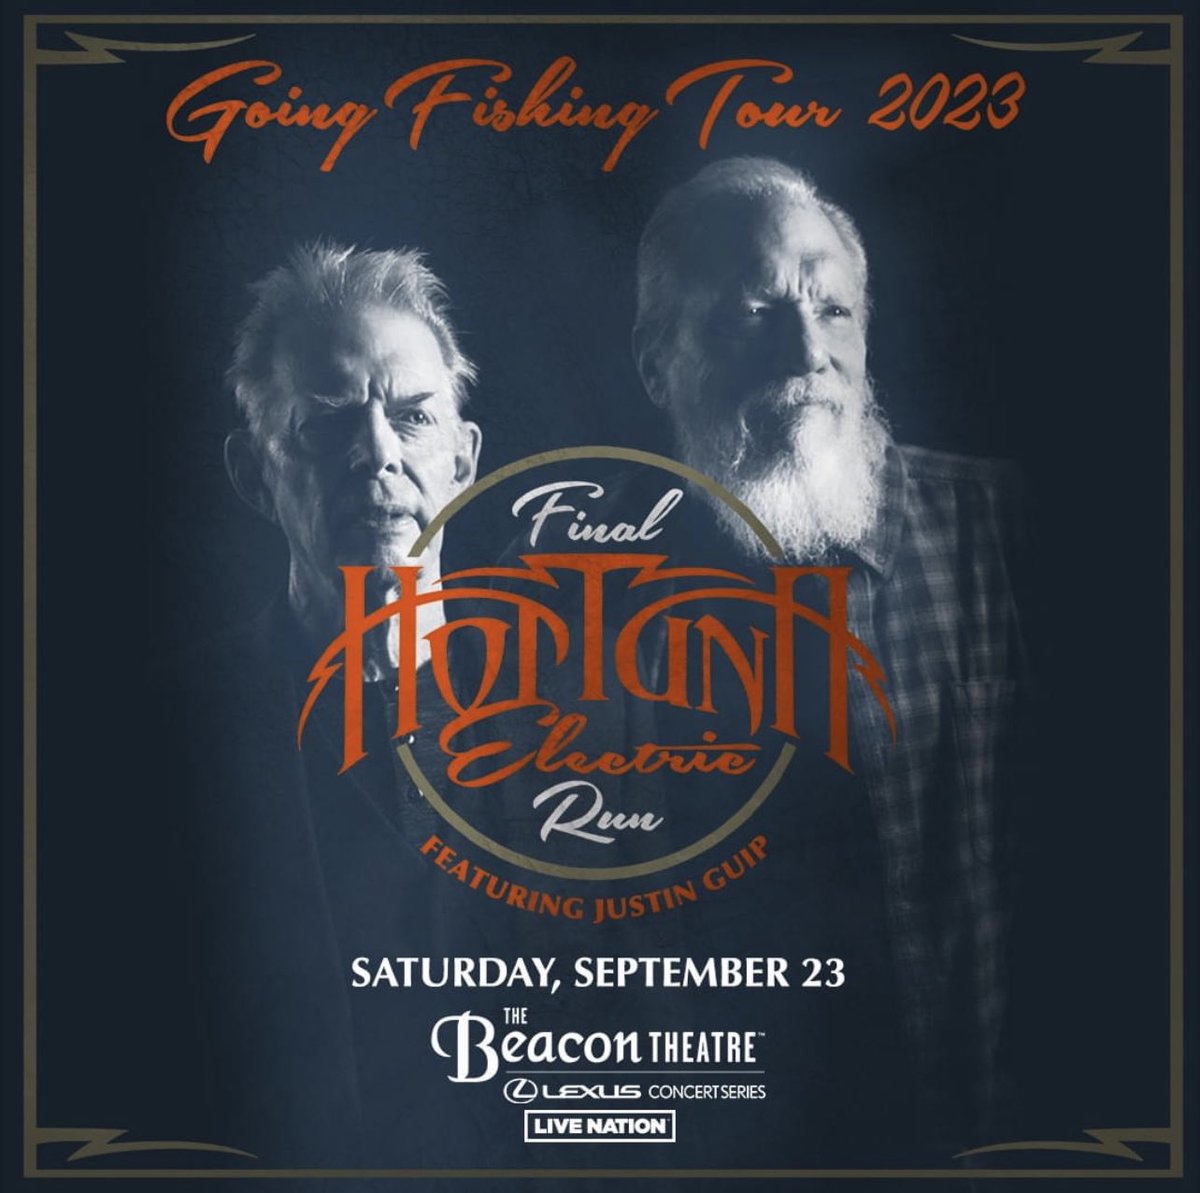 LAST CHANCE! Don't miss out on tickets to see Hot Tuna at the Beacon Theatre this Saturday, September 23. Get tickets now! msg.com/calendar/beaco…